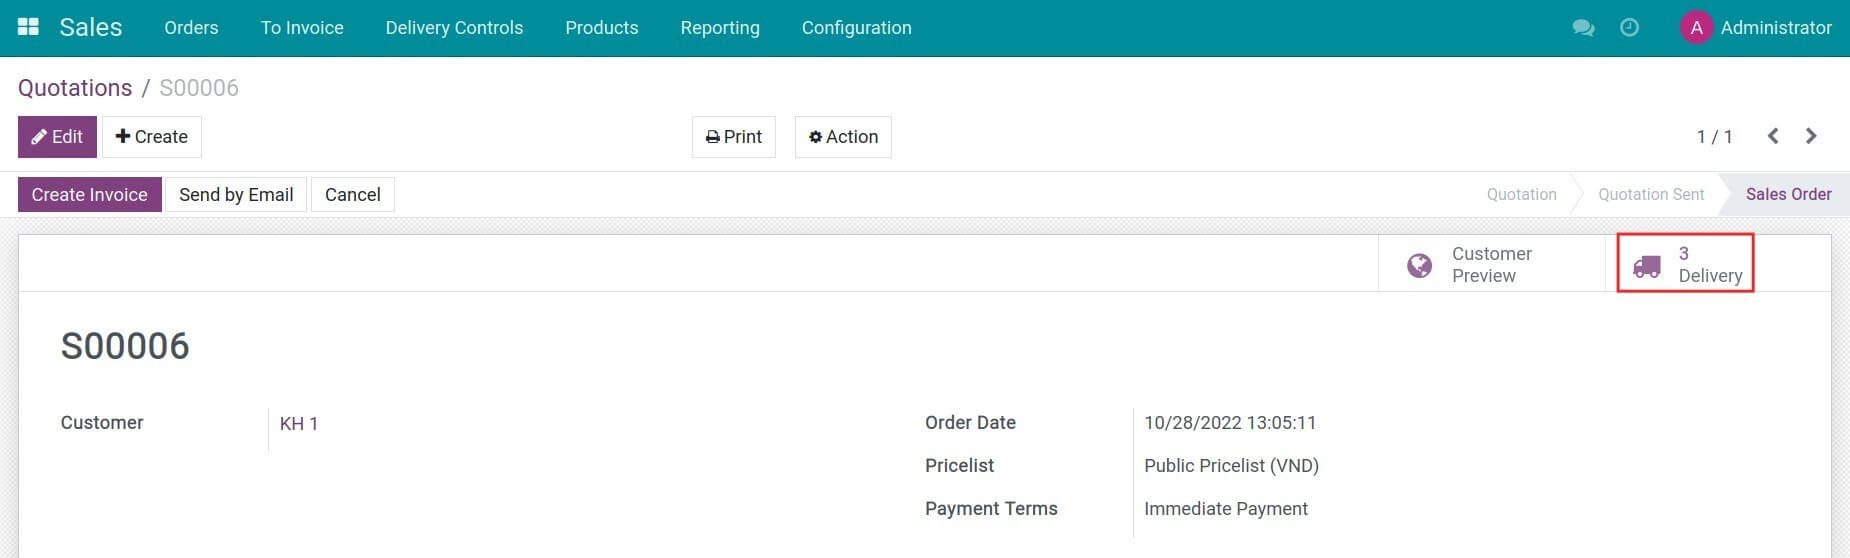 Confirm a sales order in Viindoo